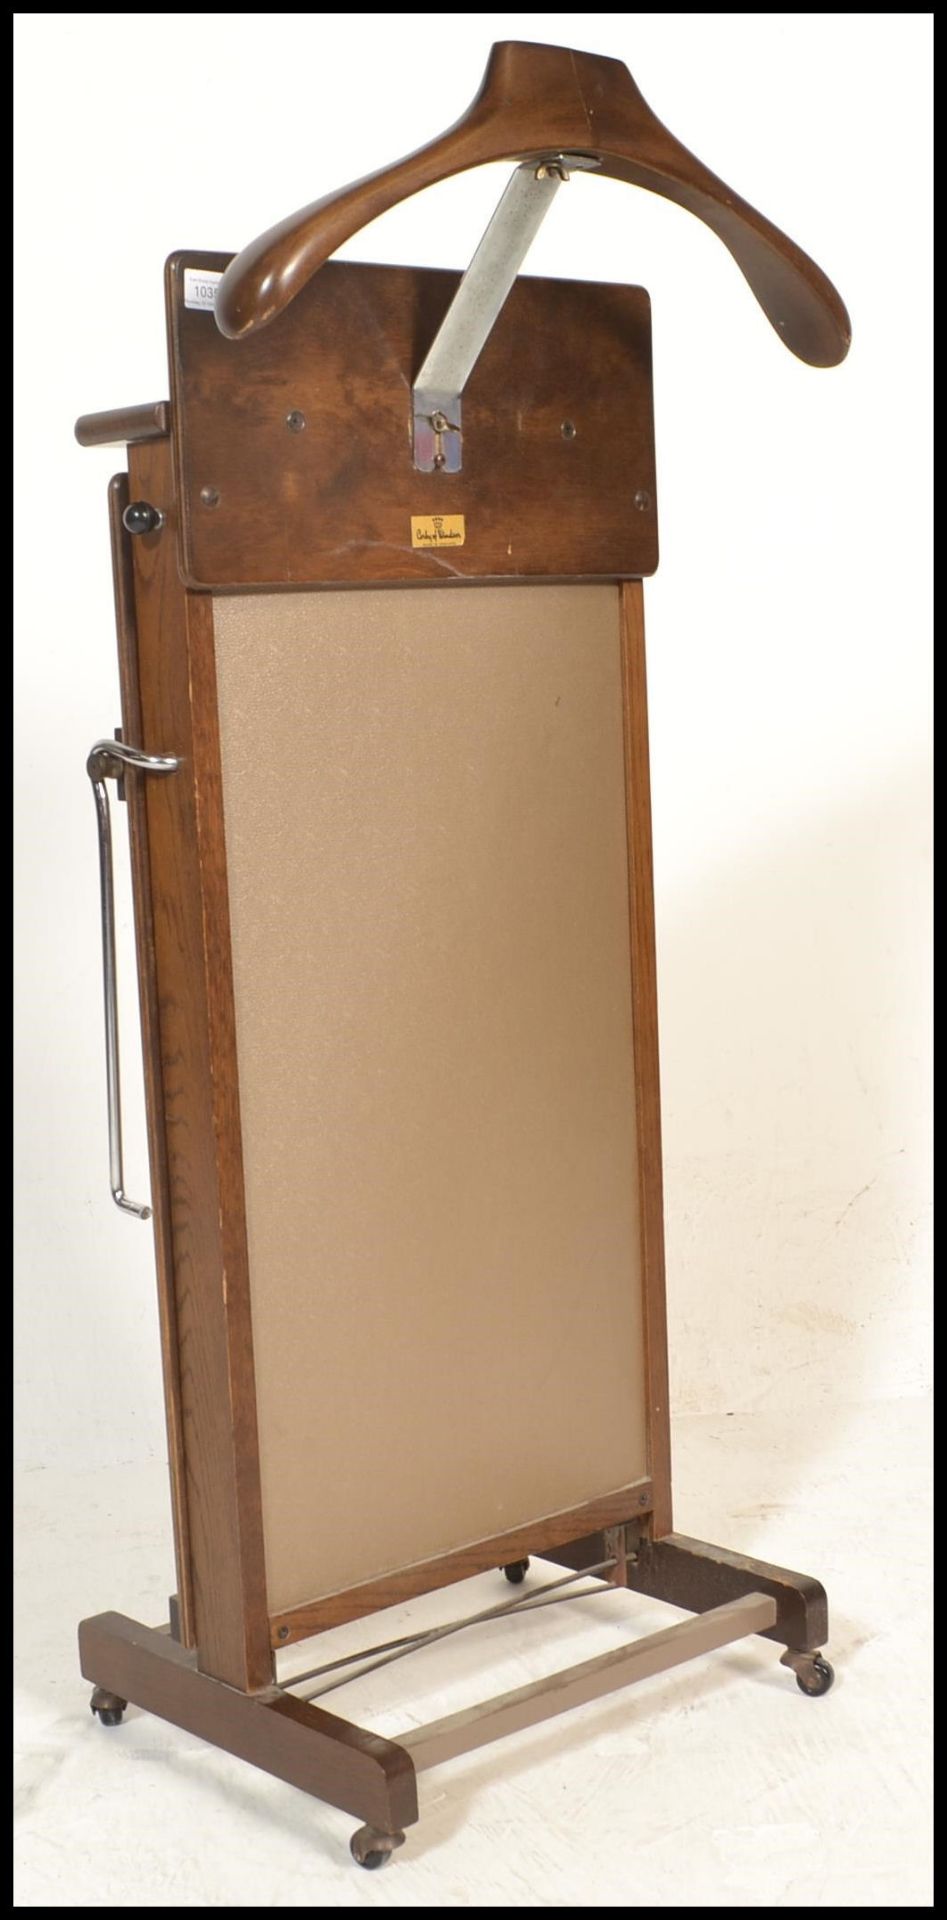 A vintage mid 20th Century Corby of Windsor trouser press valet stand constructed from wooden panels